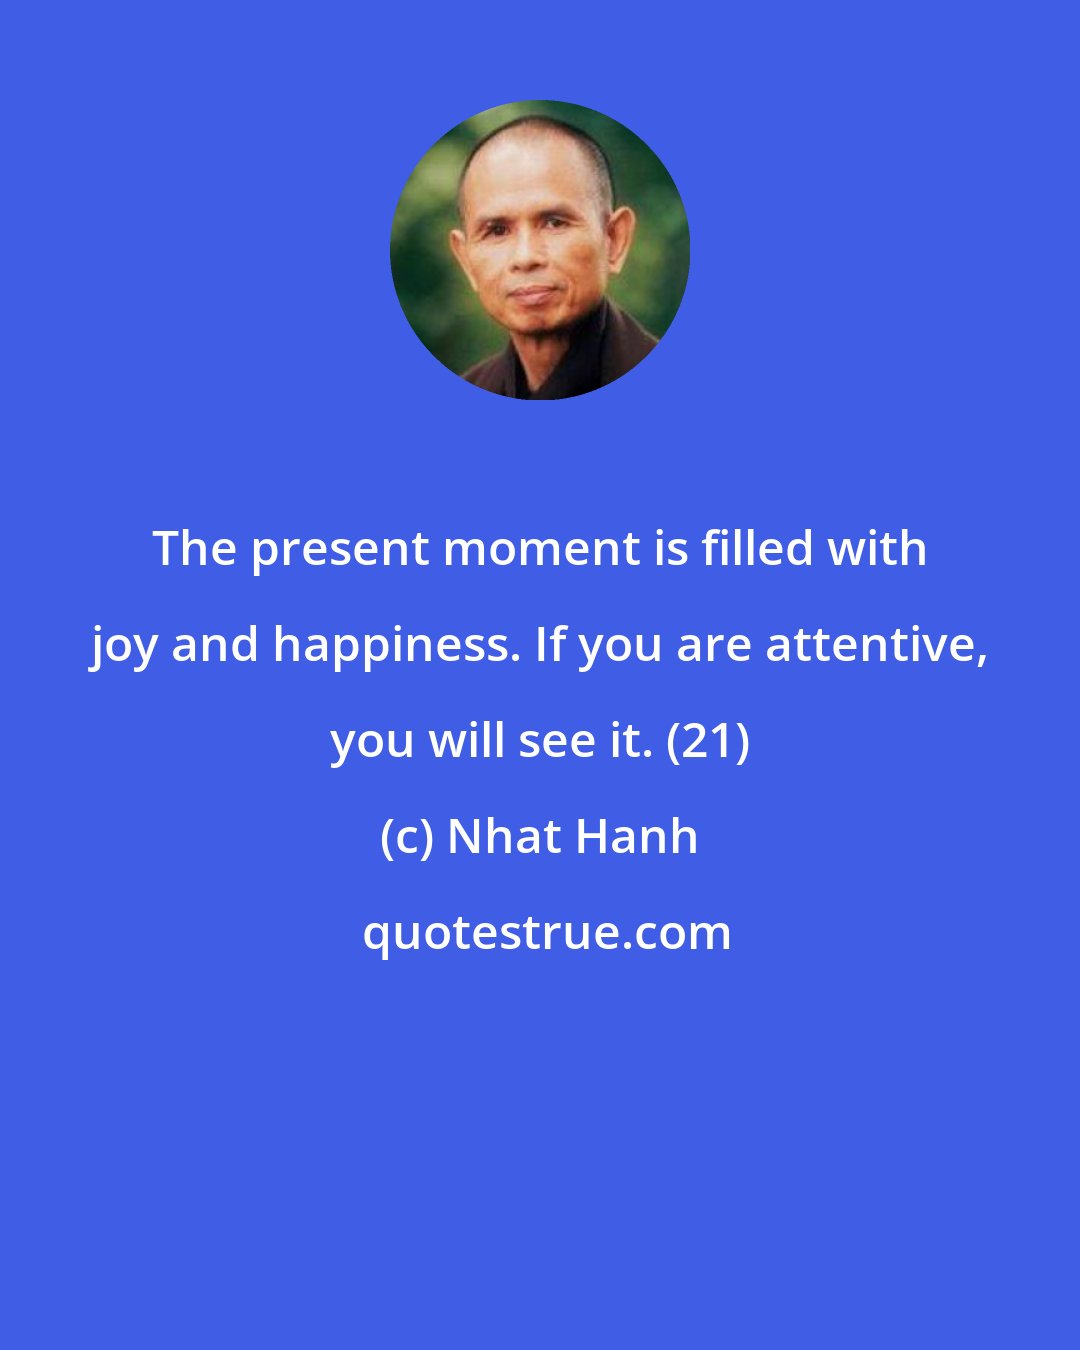 Nhat Hanh: The present moment is filled with joy and happiness. If you are attentive, you will see it. (21)